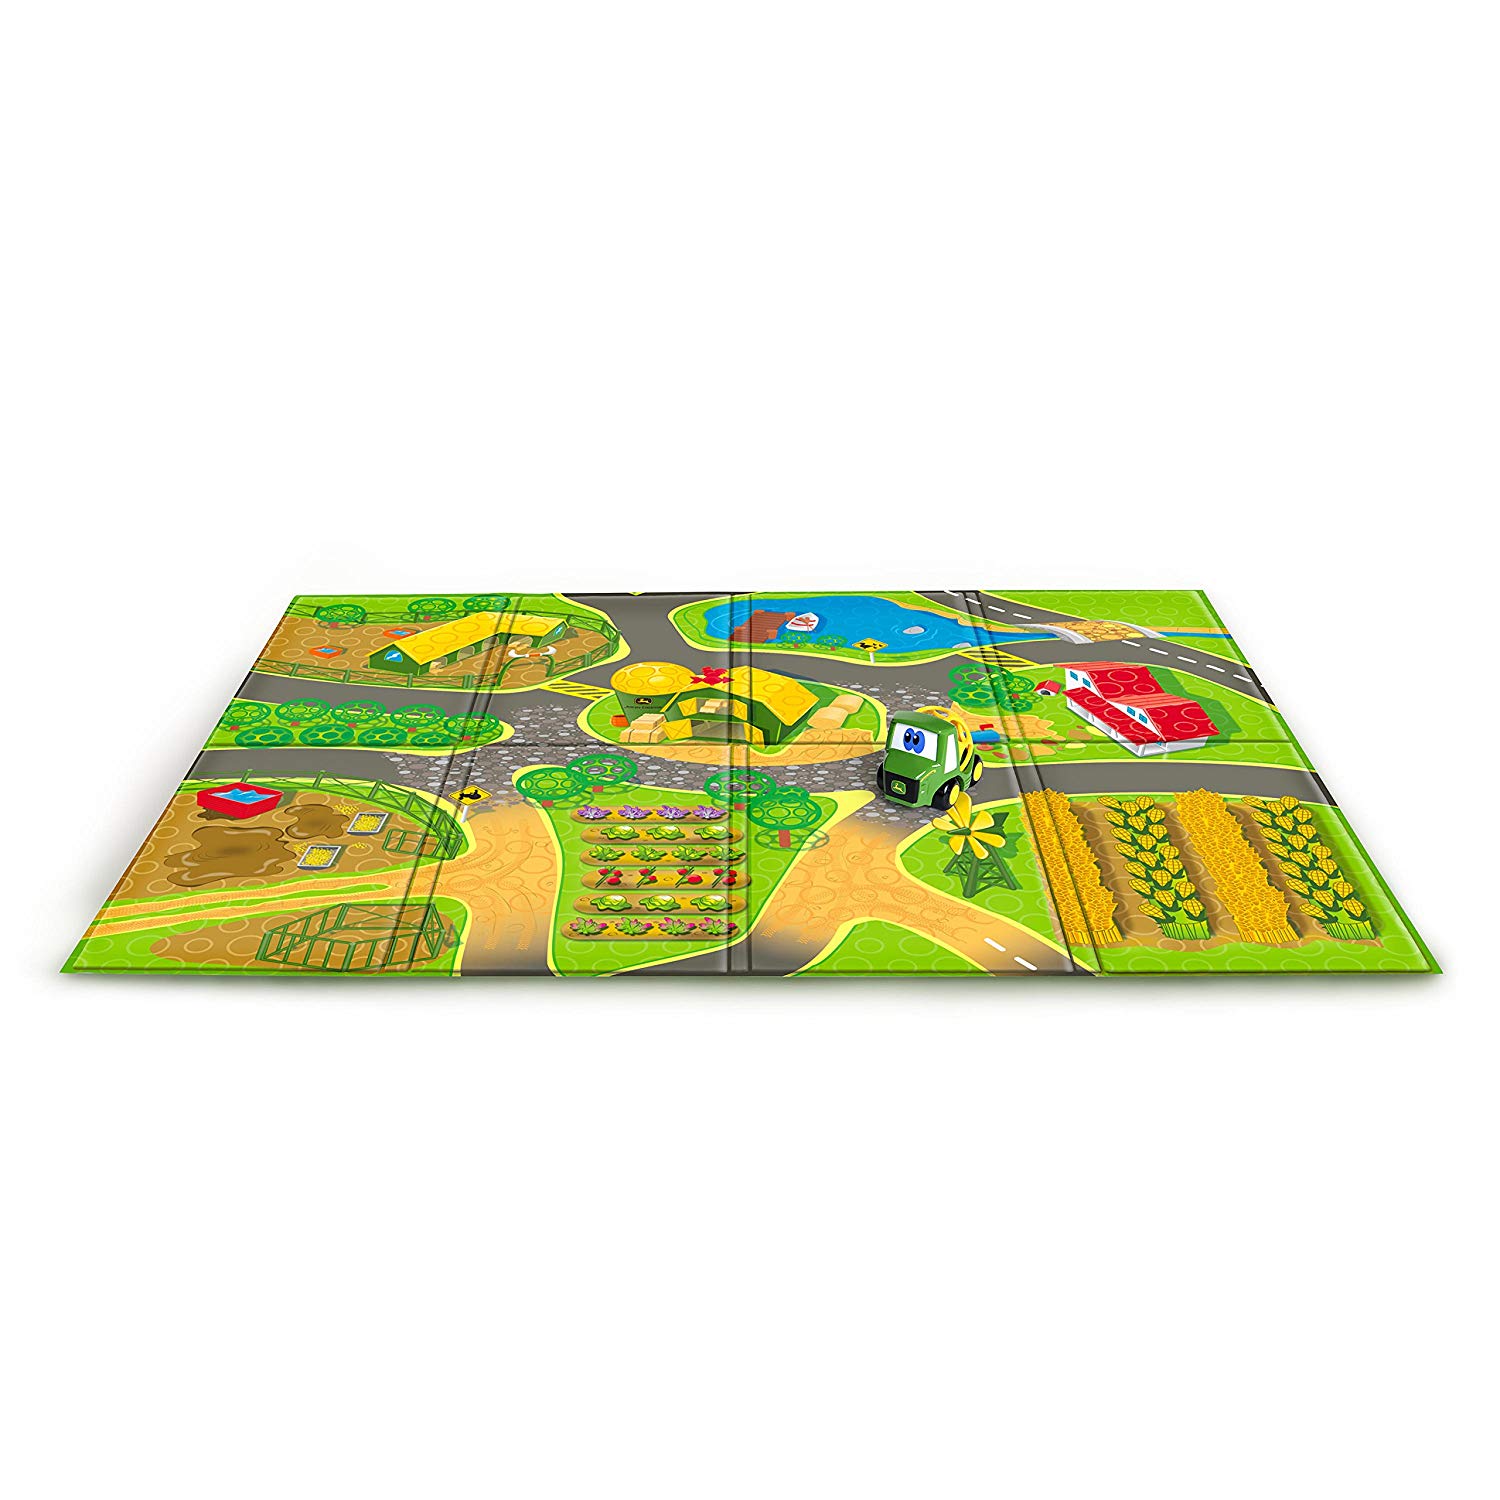 Oball - John Deere - Country Lanes Playmat and  Vehicle  (10619)